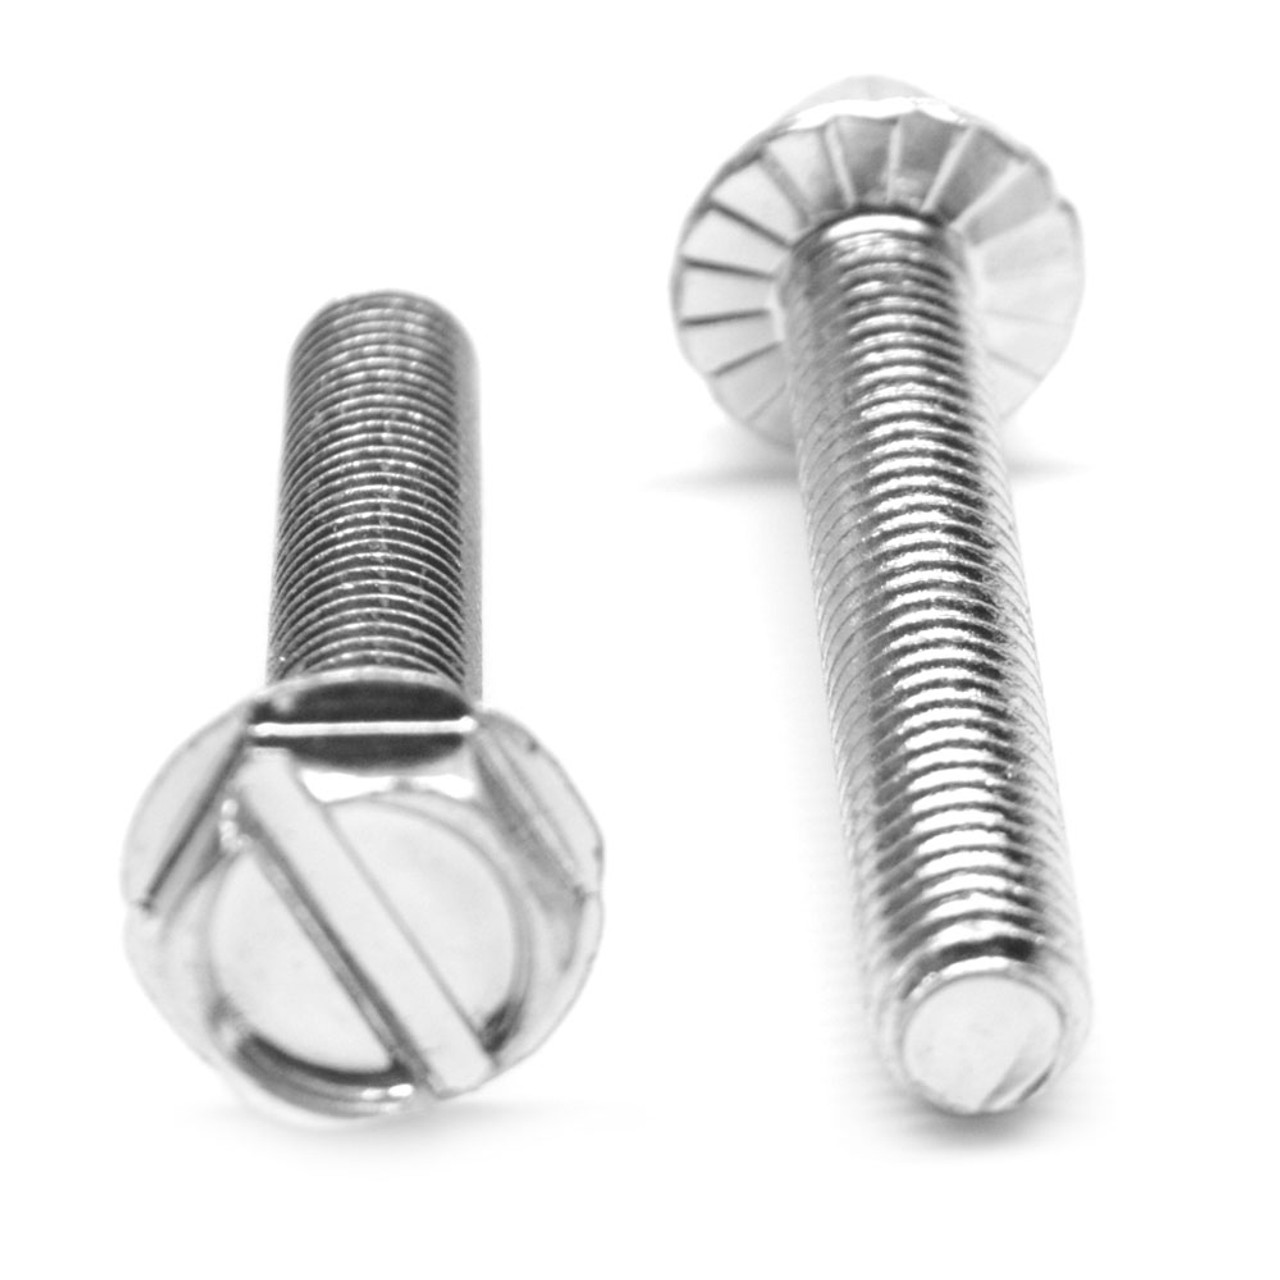 #8-32 x 1/2" (FT) Coarse Thread Machine Screw Slotted Hex Washer Head with Serration Low Carbon Steel Zinc Plated